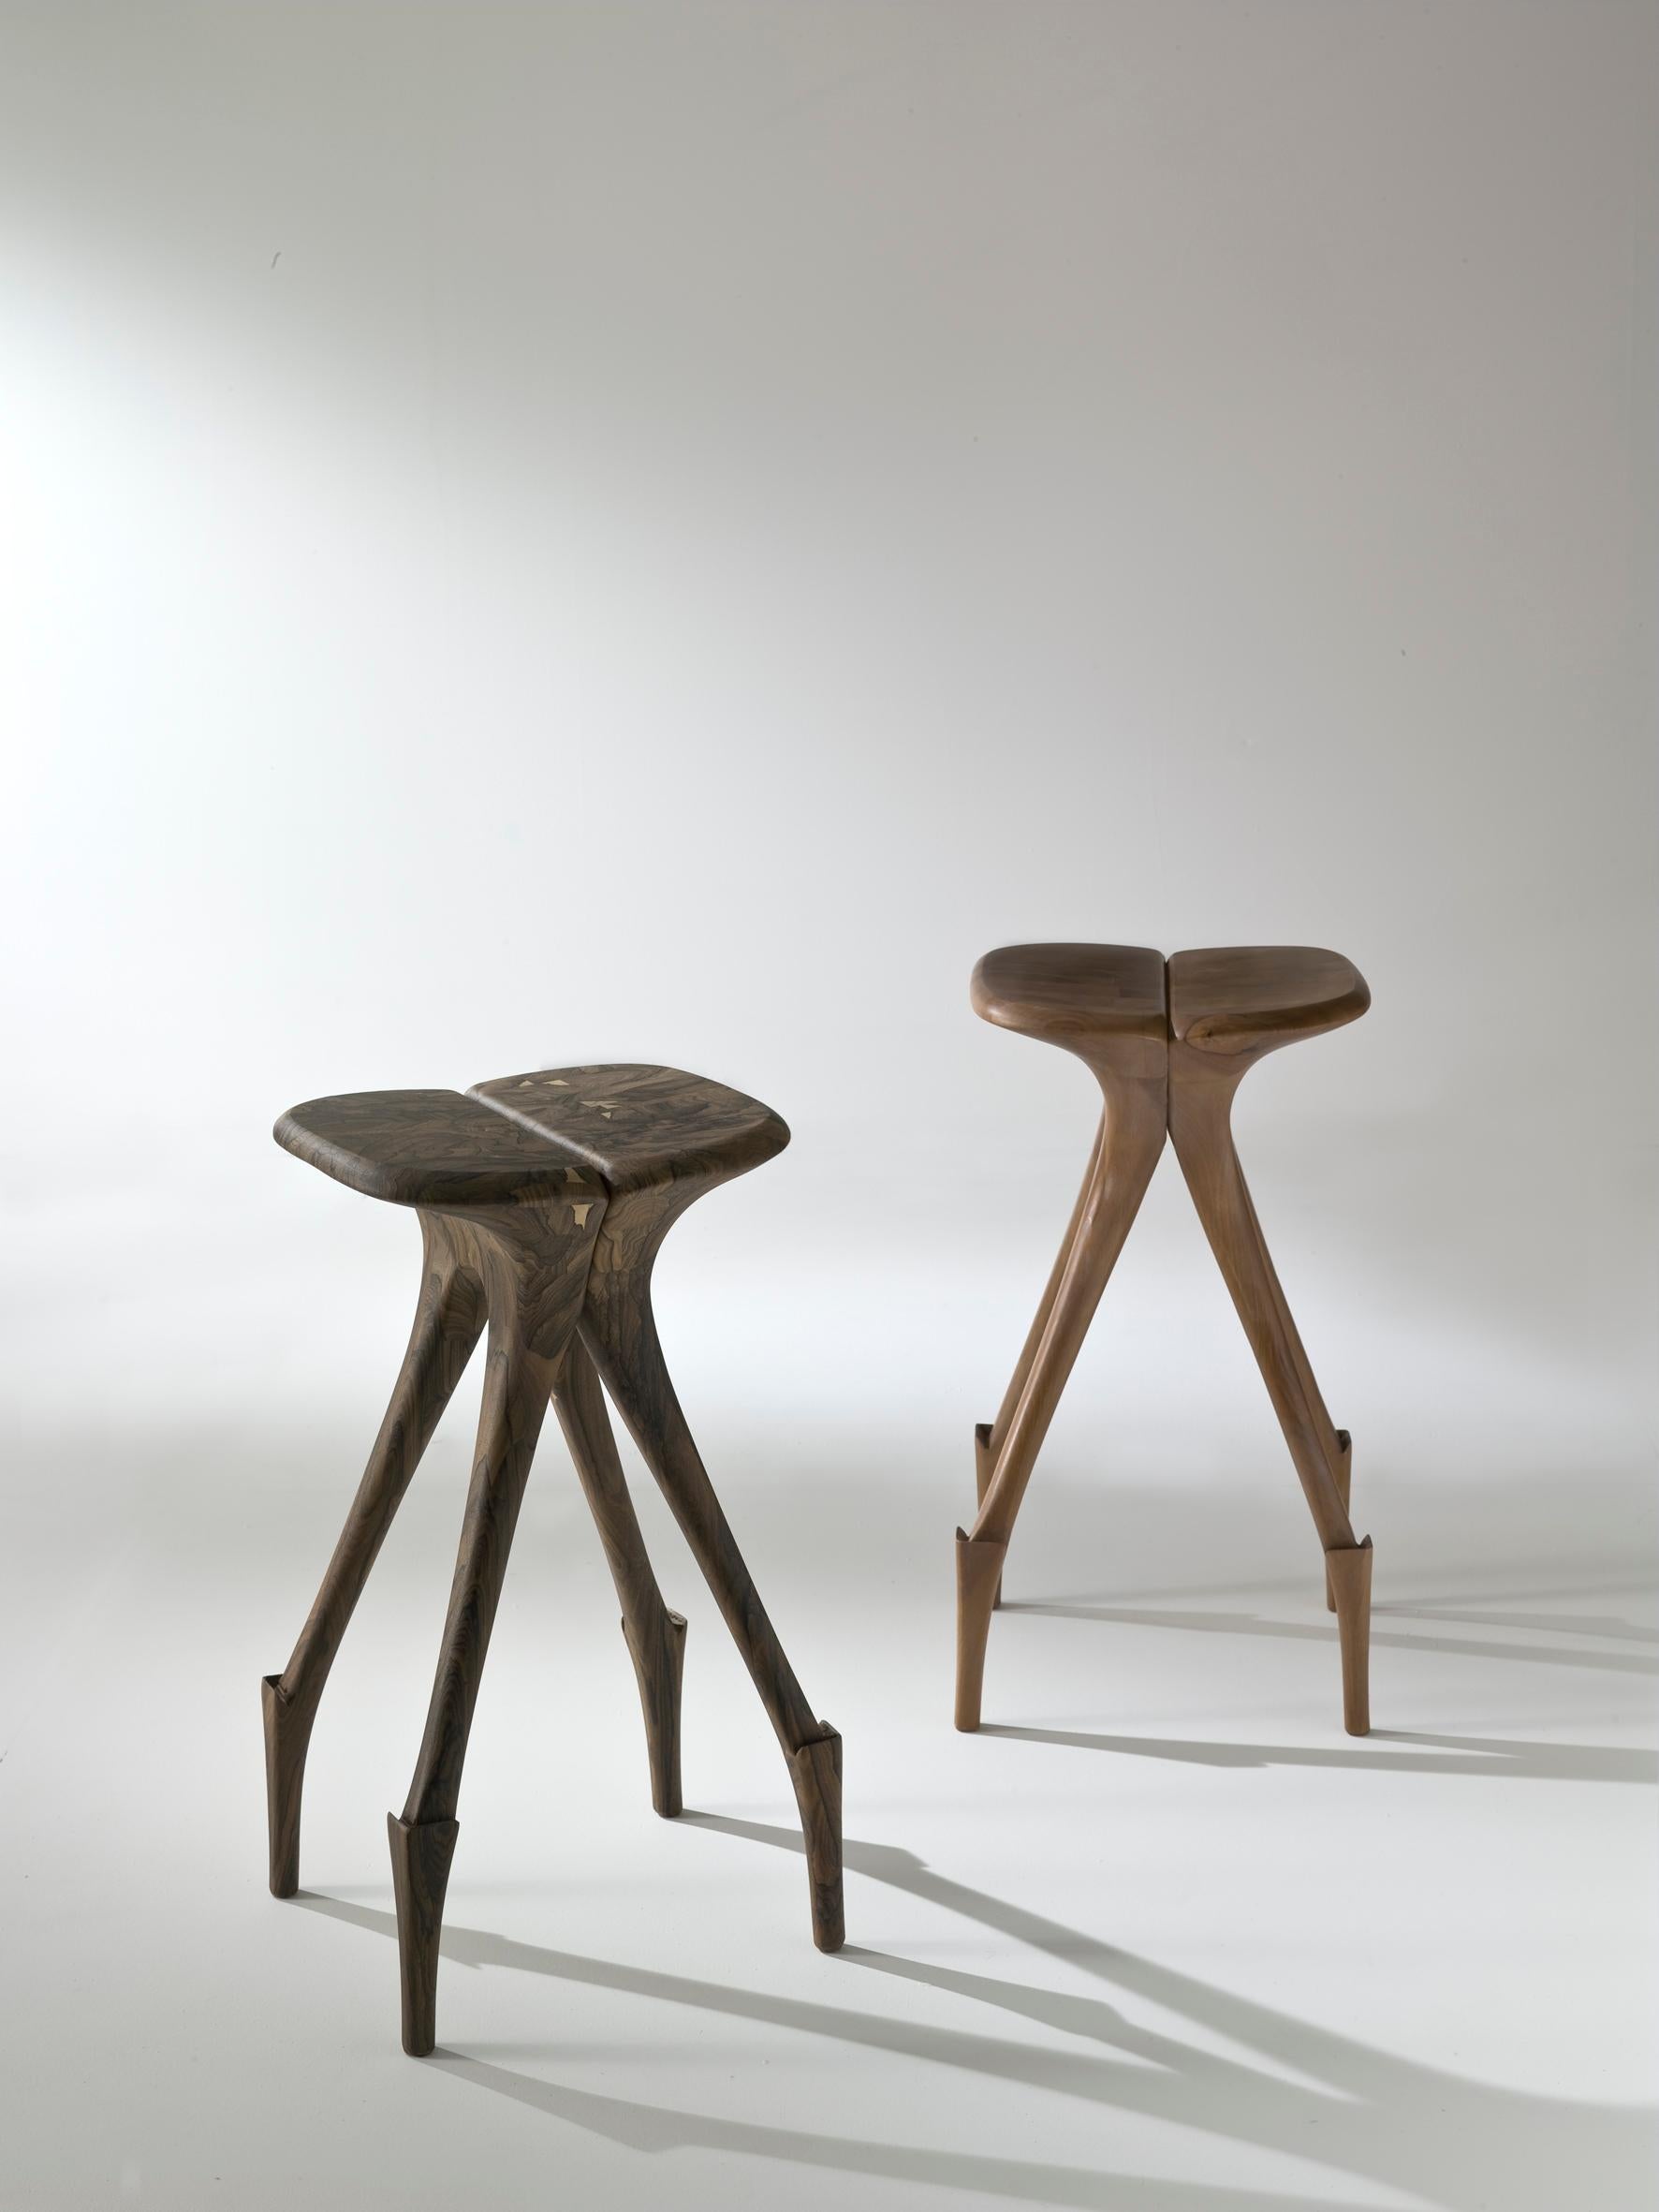 The grace and elegance of the giraffe find expression in the form of a meticulously handcrafted walnut heartwood stool. Inspired by the untamed beauty of Africa, this stool is a true embodiment of nature's allure and artistic refinement.

Crafted